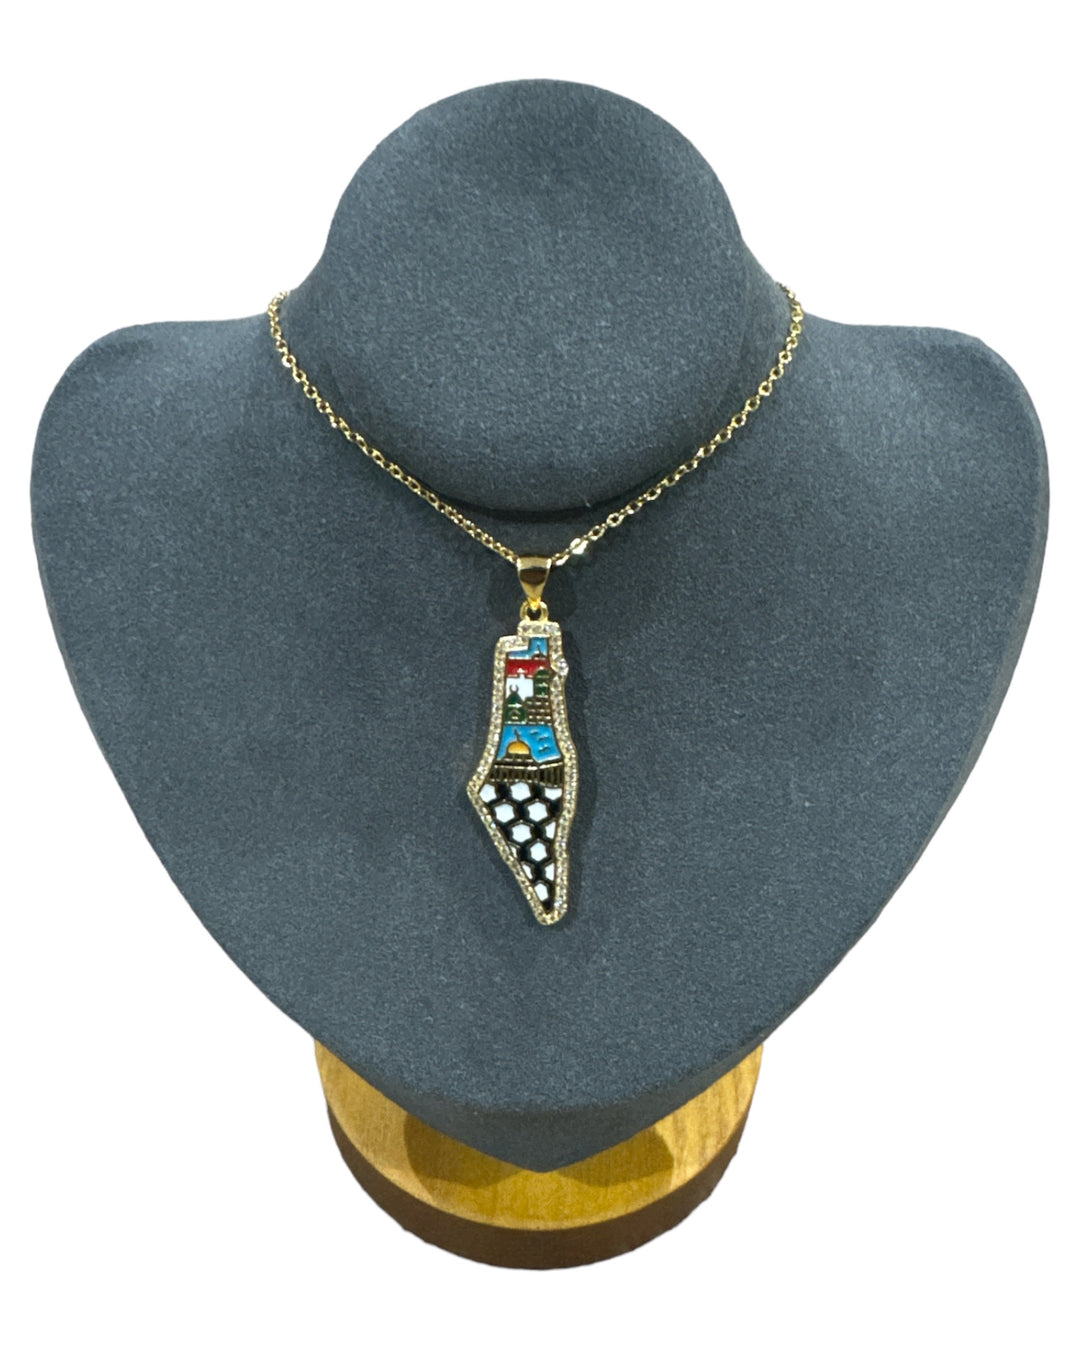 Architectural Elegance: Gold Palestine Map Necklace with Iconic Buildings & Keffiyeh Detail